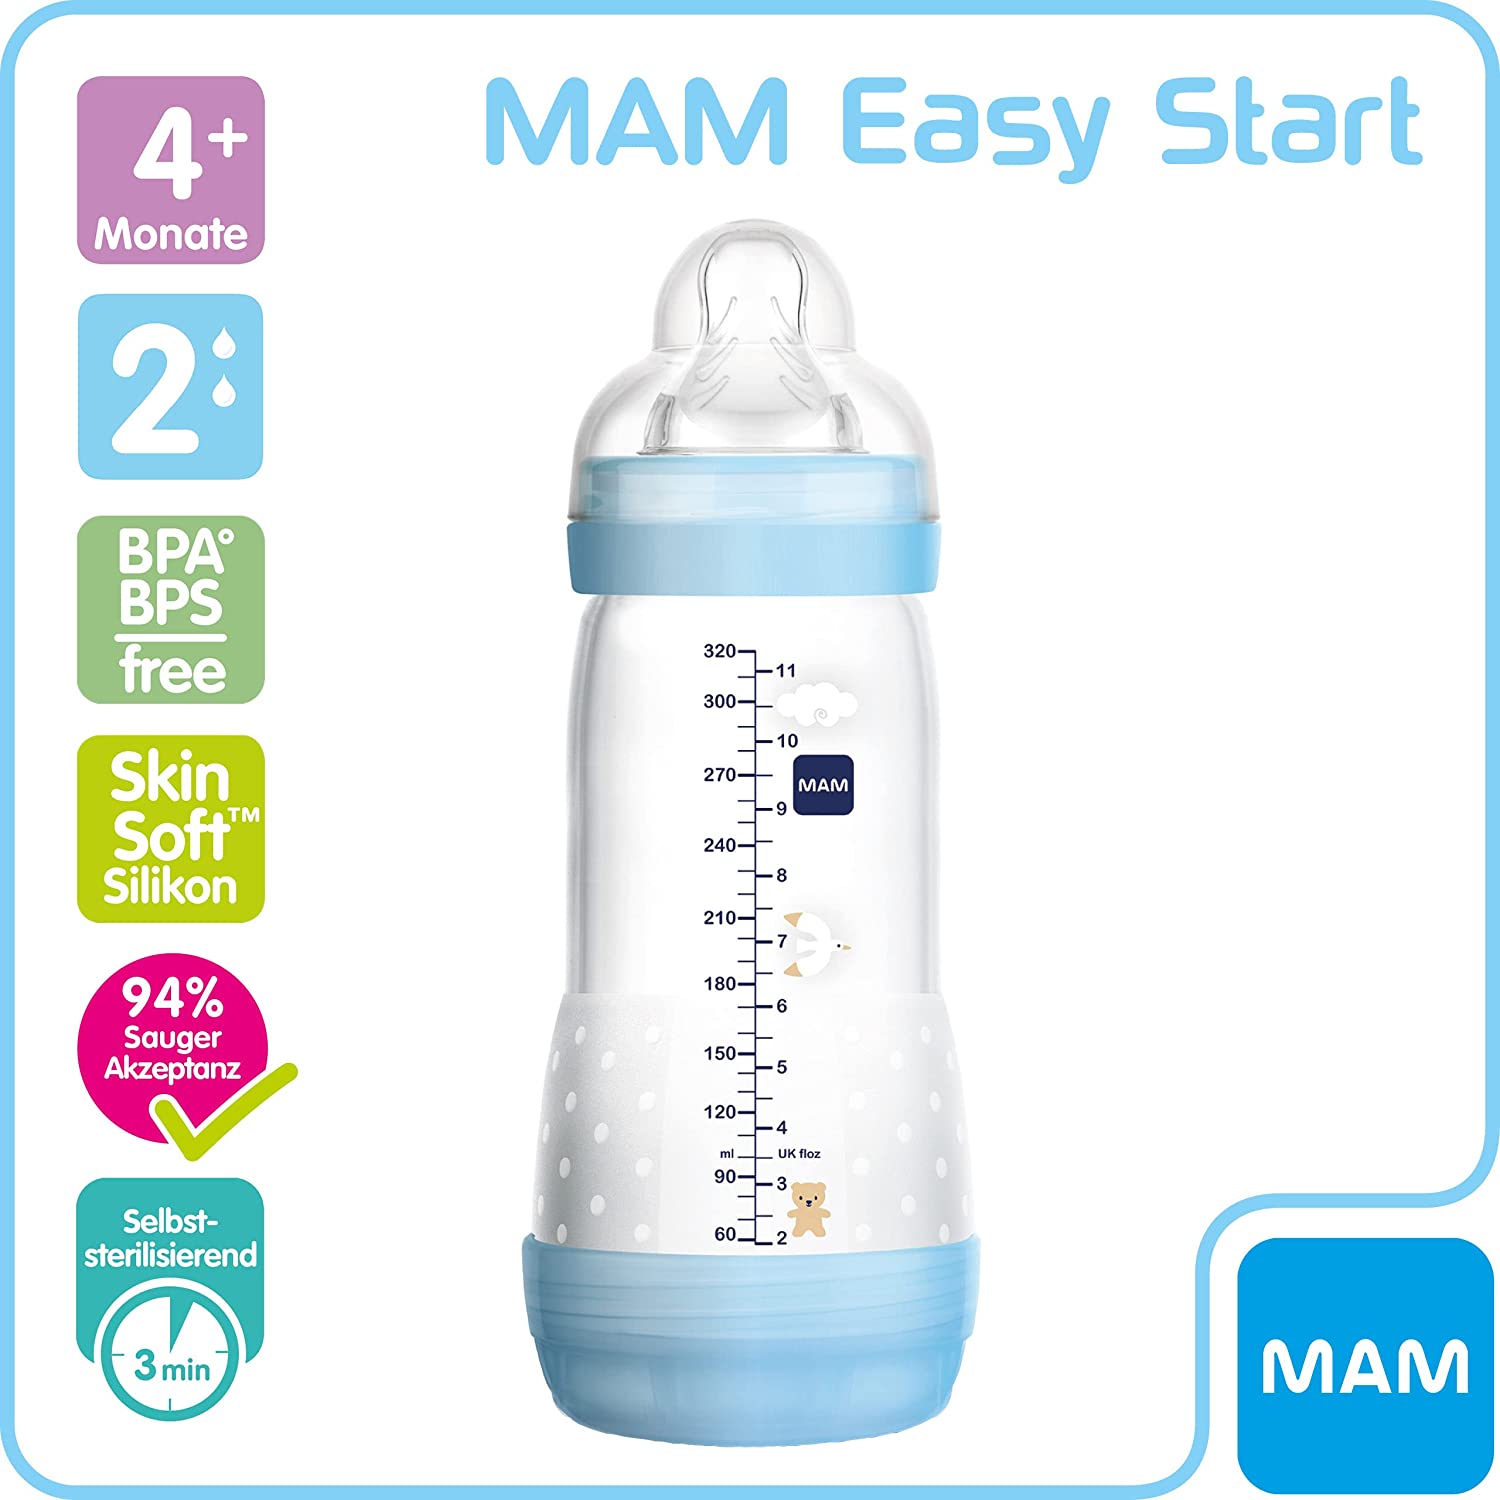 MAM Easy Start anti-colic baby bottle (320 ml), milk bottle with innovative base valve to prevent colic, baby’s drinking bottle with size 2 teat, 4+ months, bear